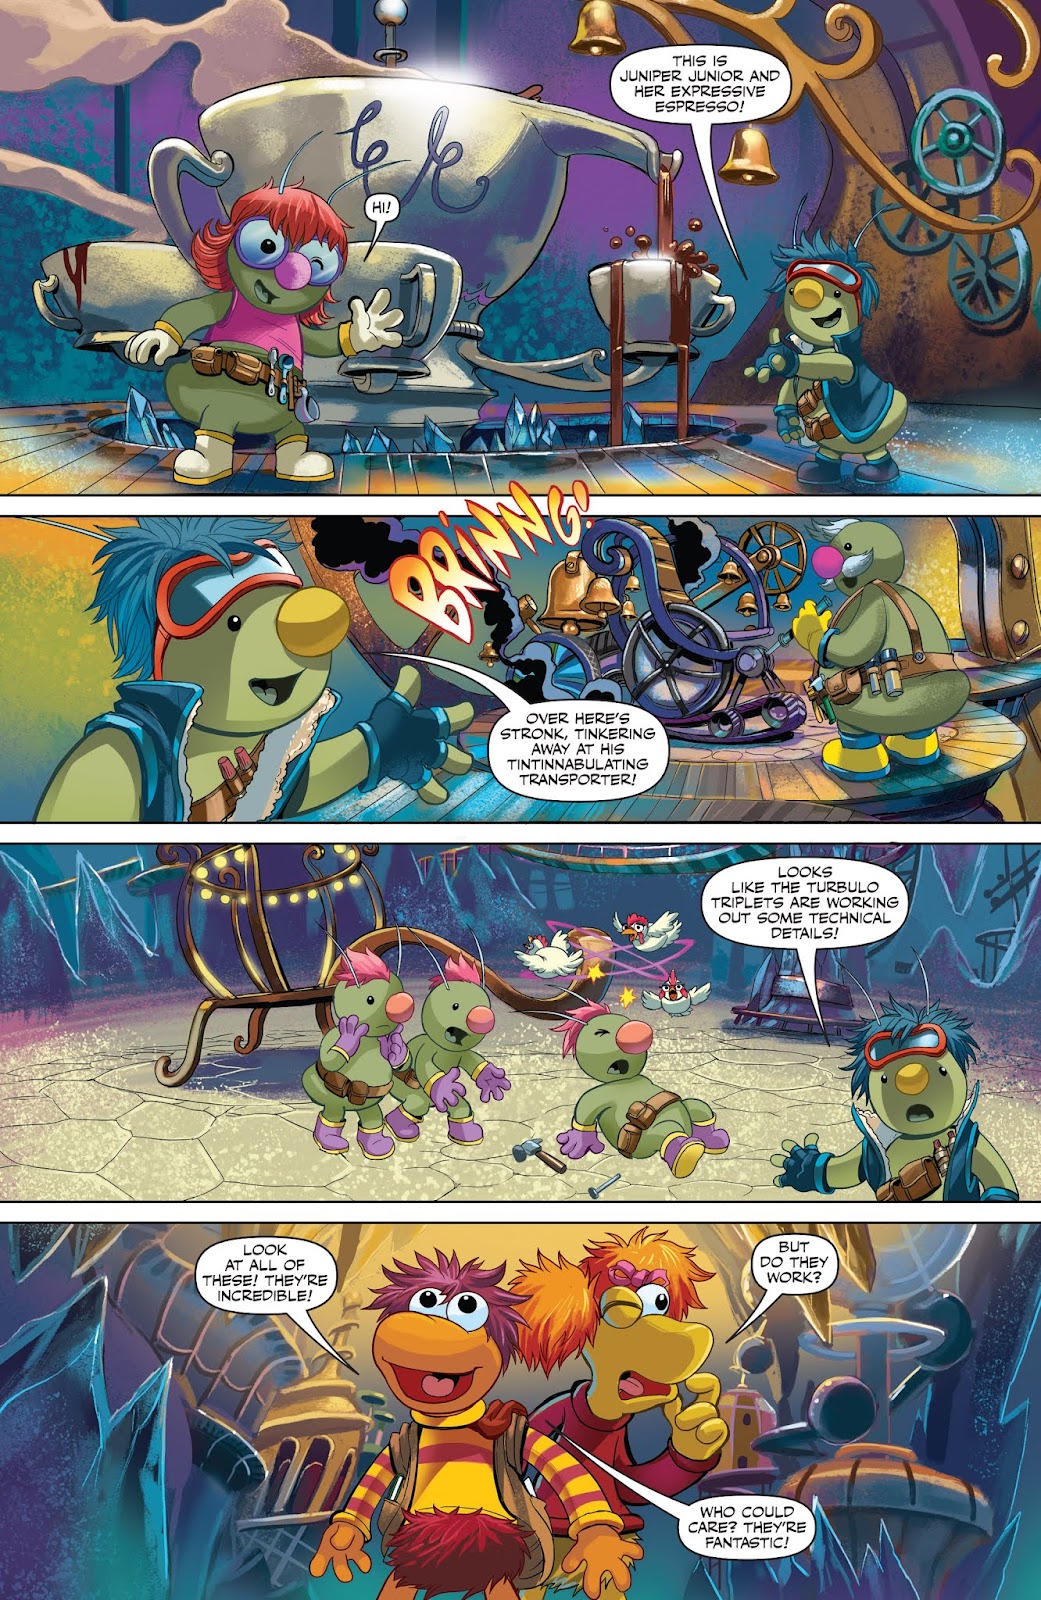 Jim Henson's Fraggle Rock: Journey to the Everspring issue 3 - Page 10